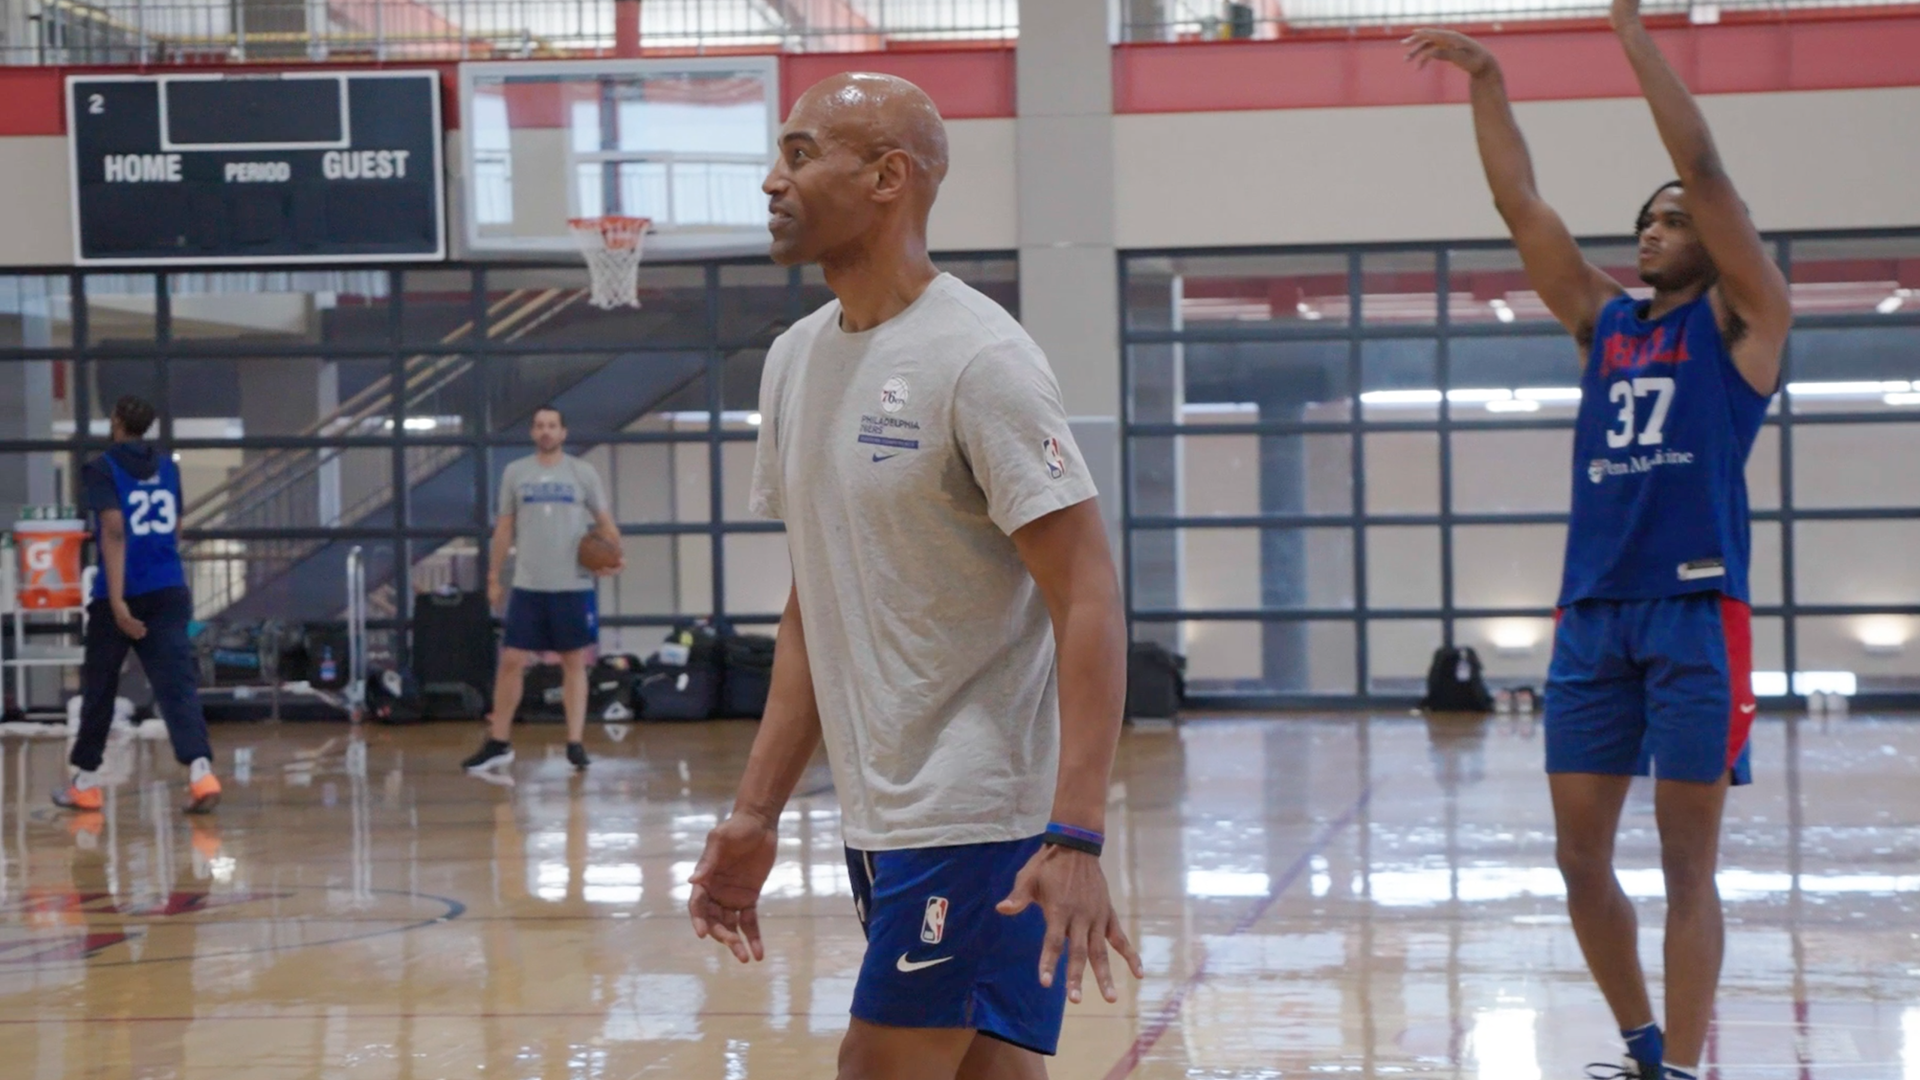 Sixers using NBA Summer League for player development